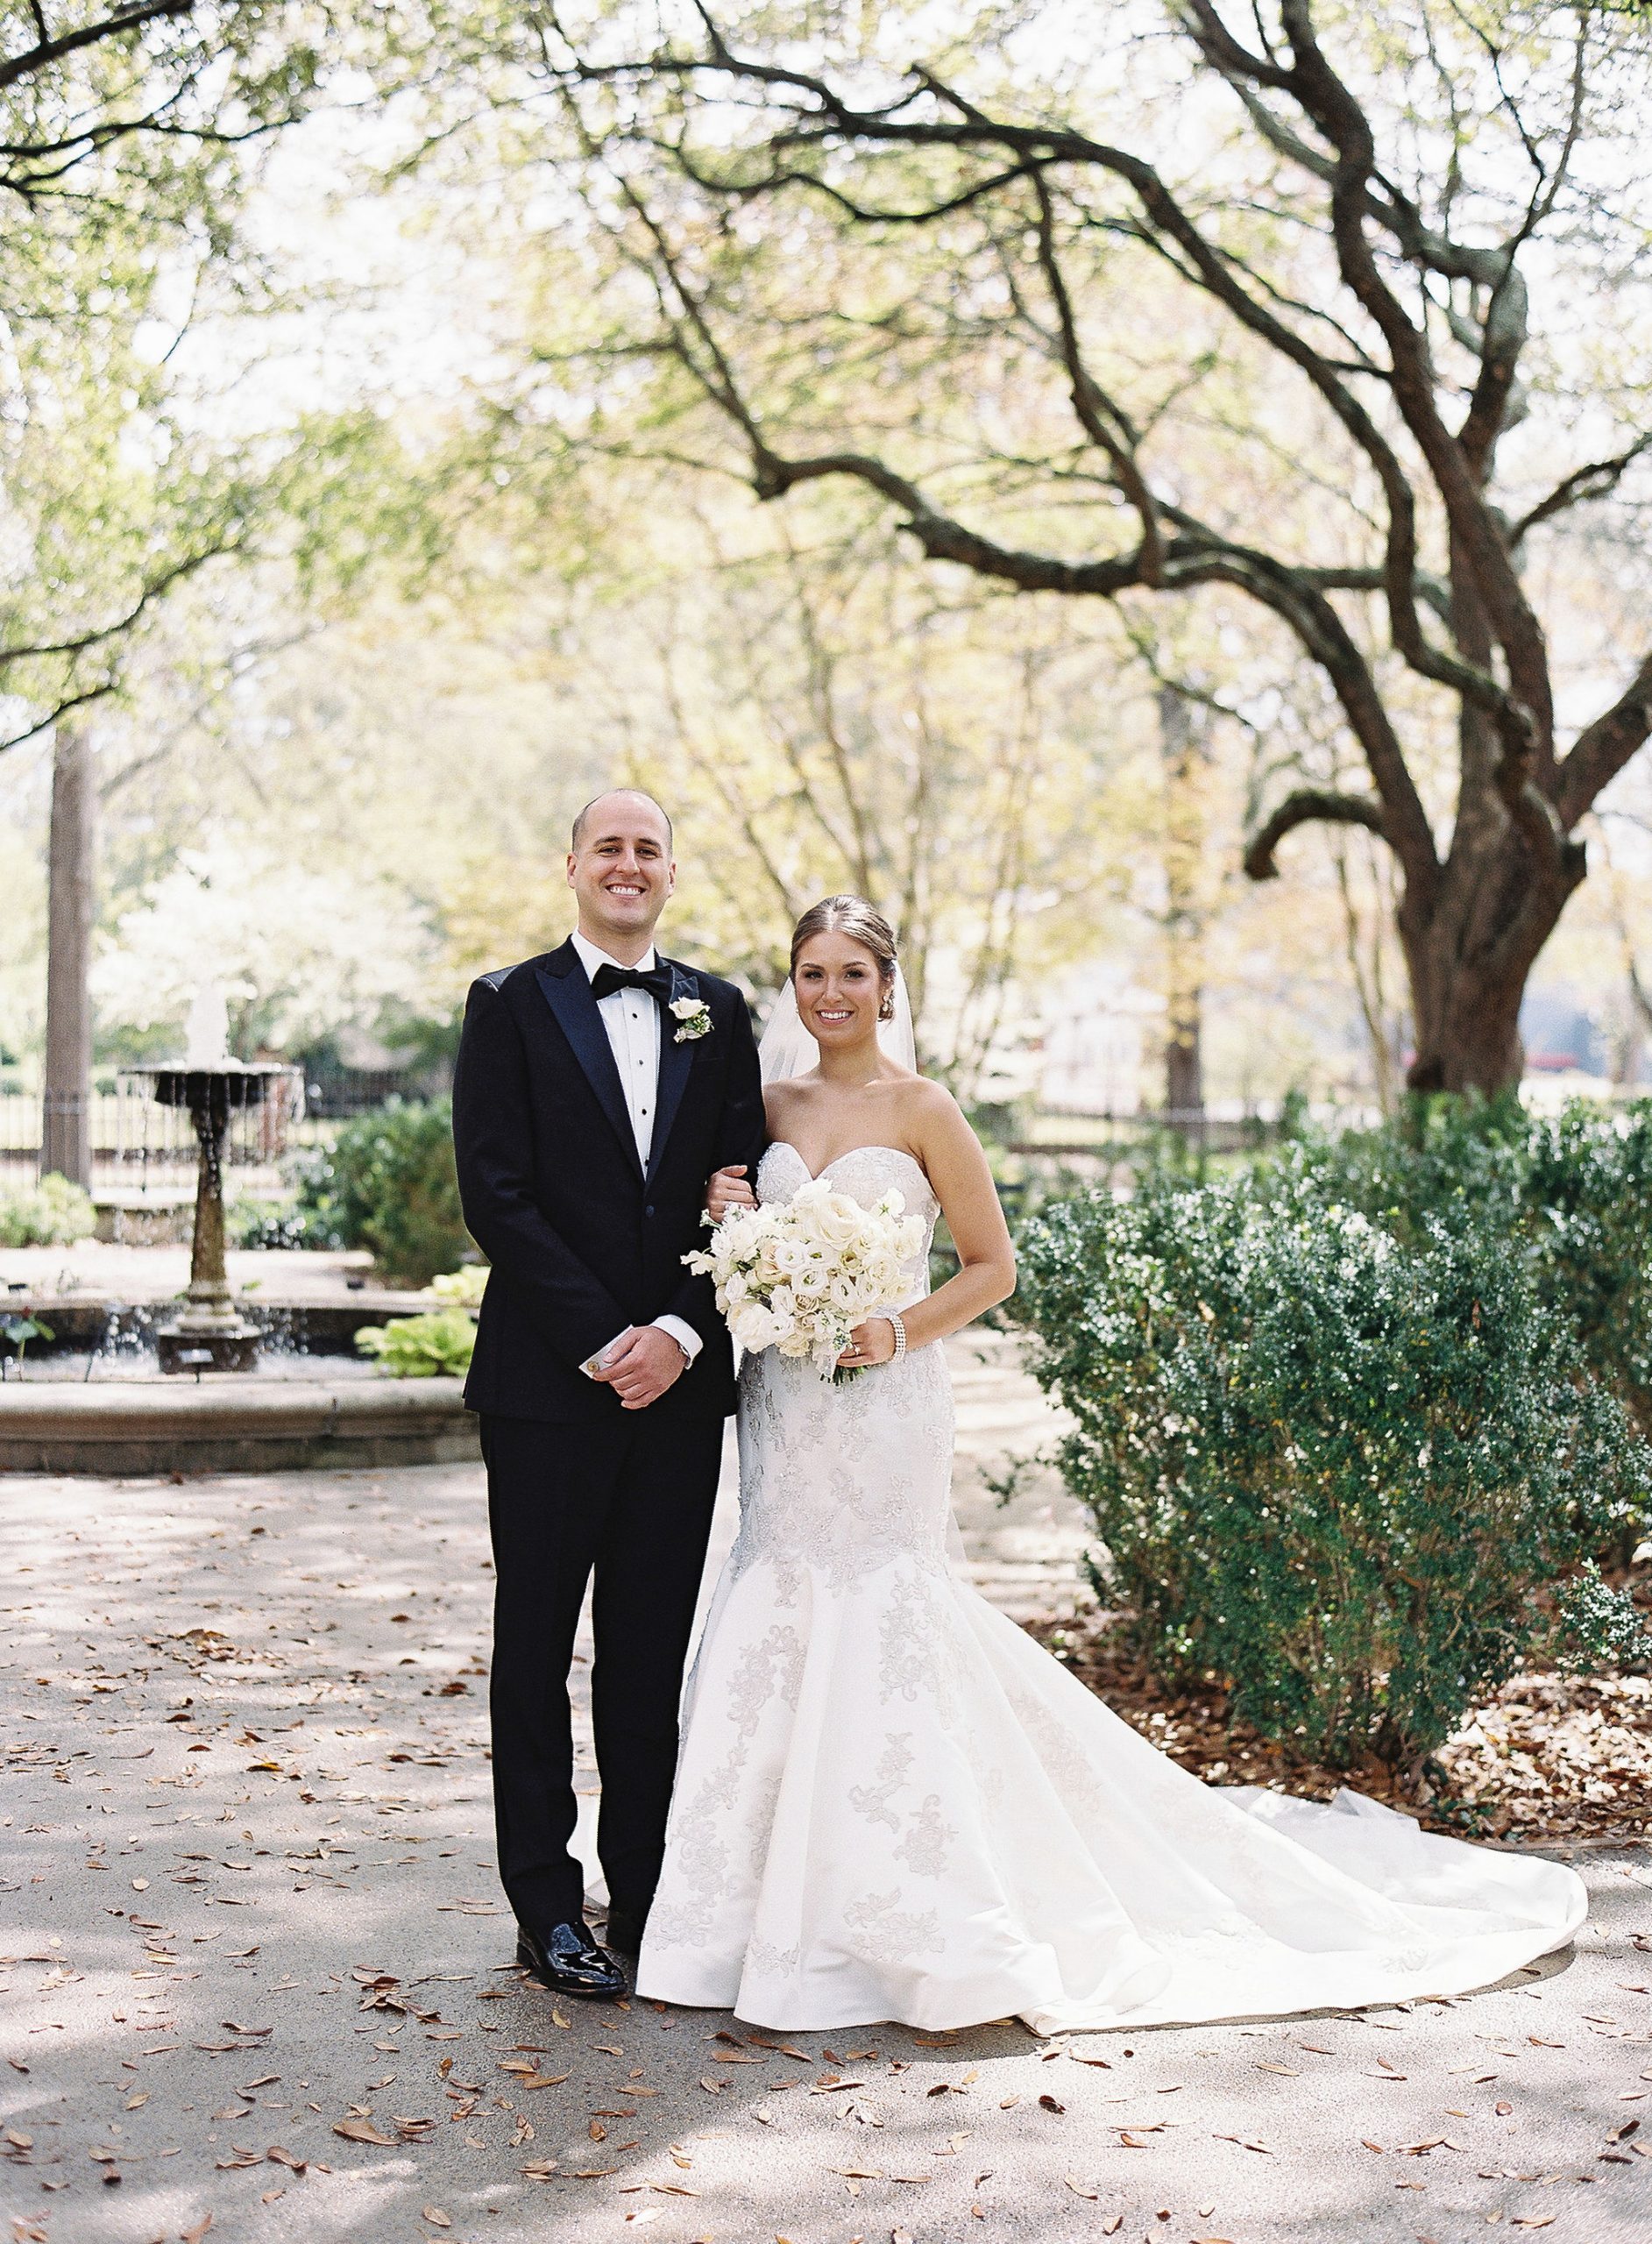 Mary Anne Kleitches and Jamie Mason met in 2018 on their first day of work at a digital marketing agency in Charlotte. They were married at Eastminster Presbyterian Church and enjoyed a beautiful reception planned by Meagan Warren at the gardens of the 
Hampton-Preston Mansion. On her wedding day, Mary Anne wore a pink diamond ring given to her by her father, Johnnie Kleitches, which he had previously given to her mother the day Mary Anne was born. The couple currently resides in Greenville. Courtney Price Photography